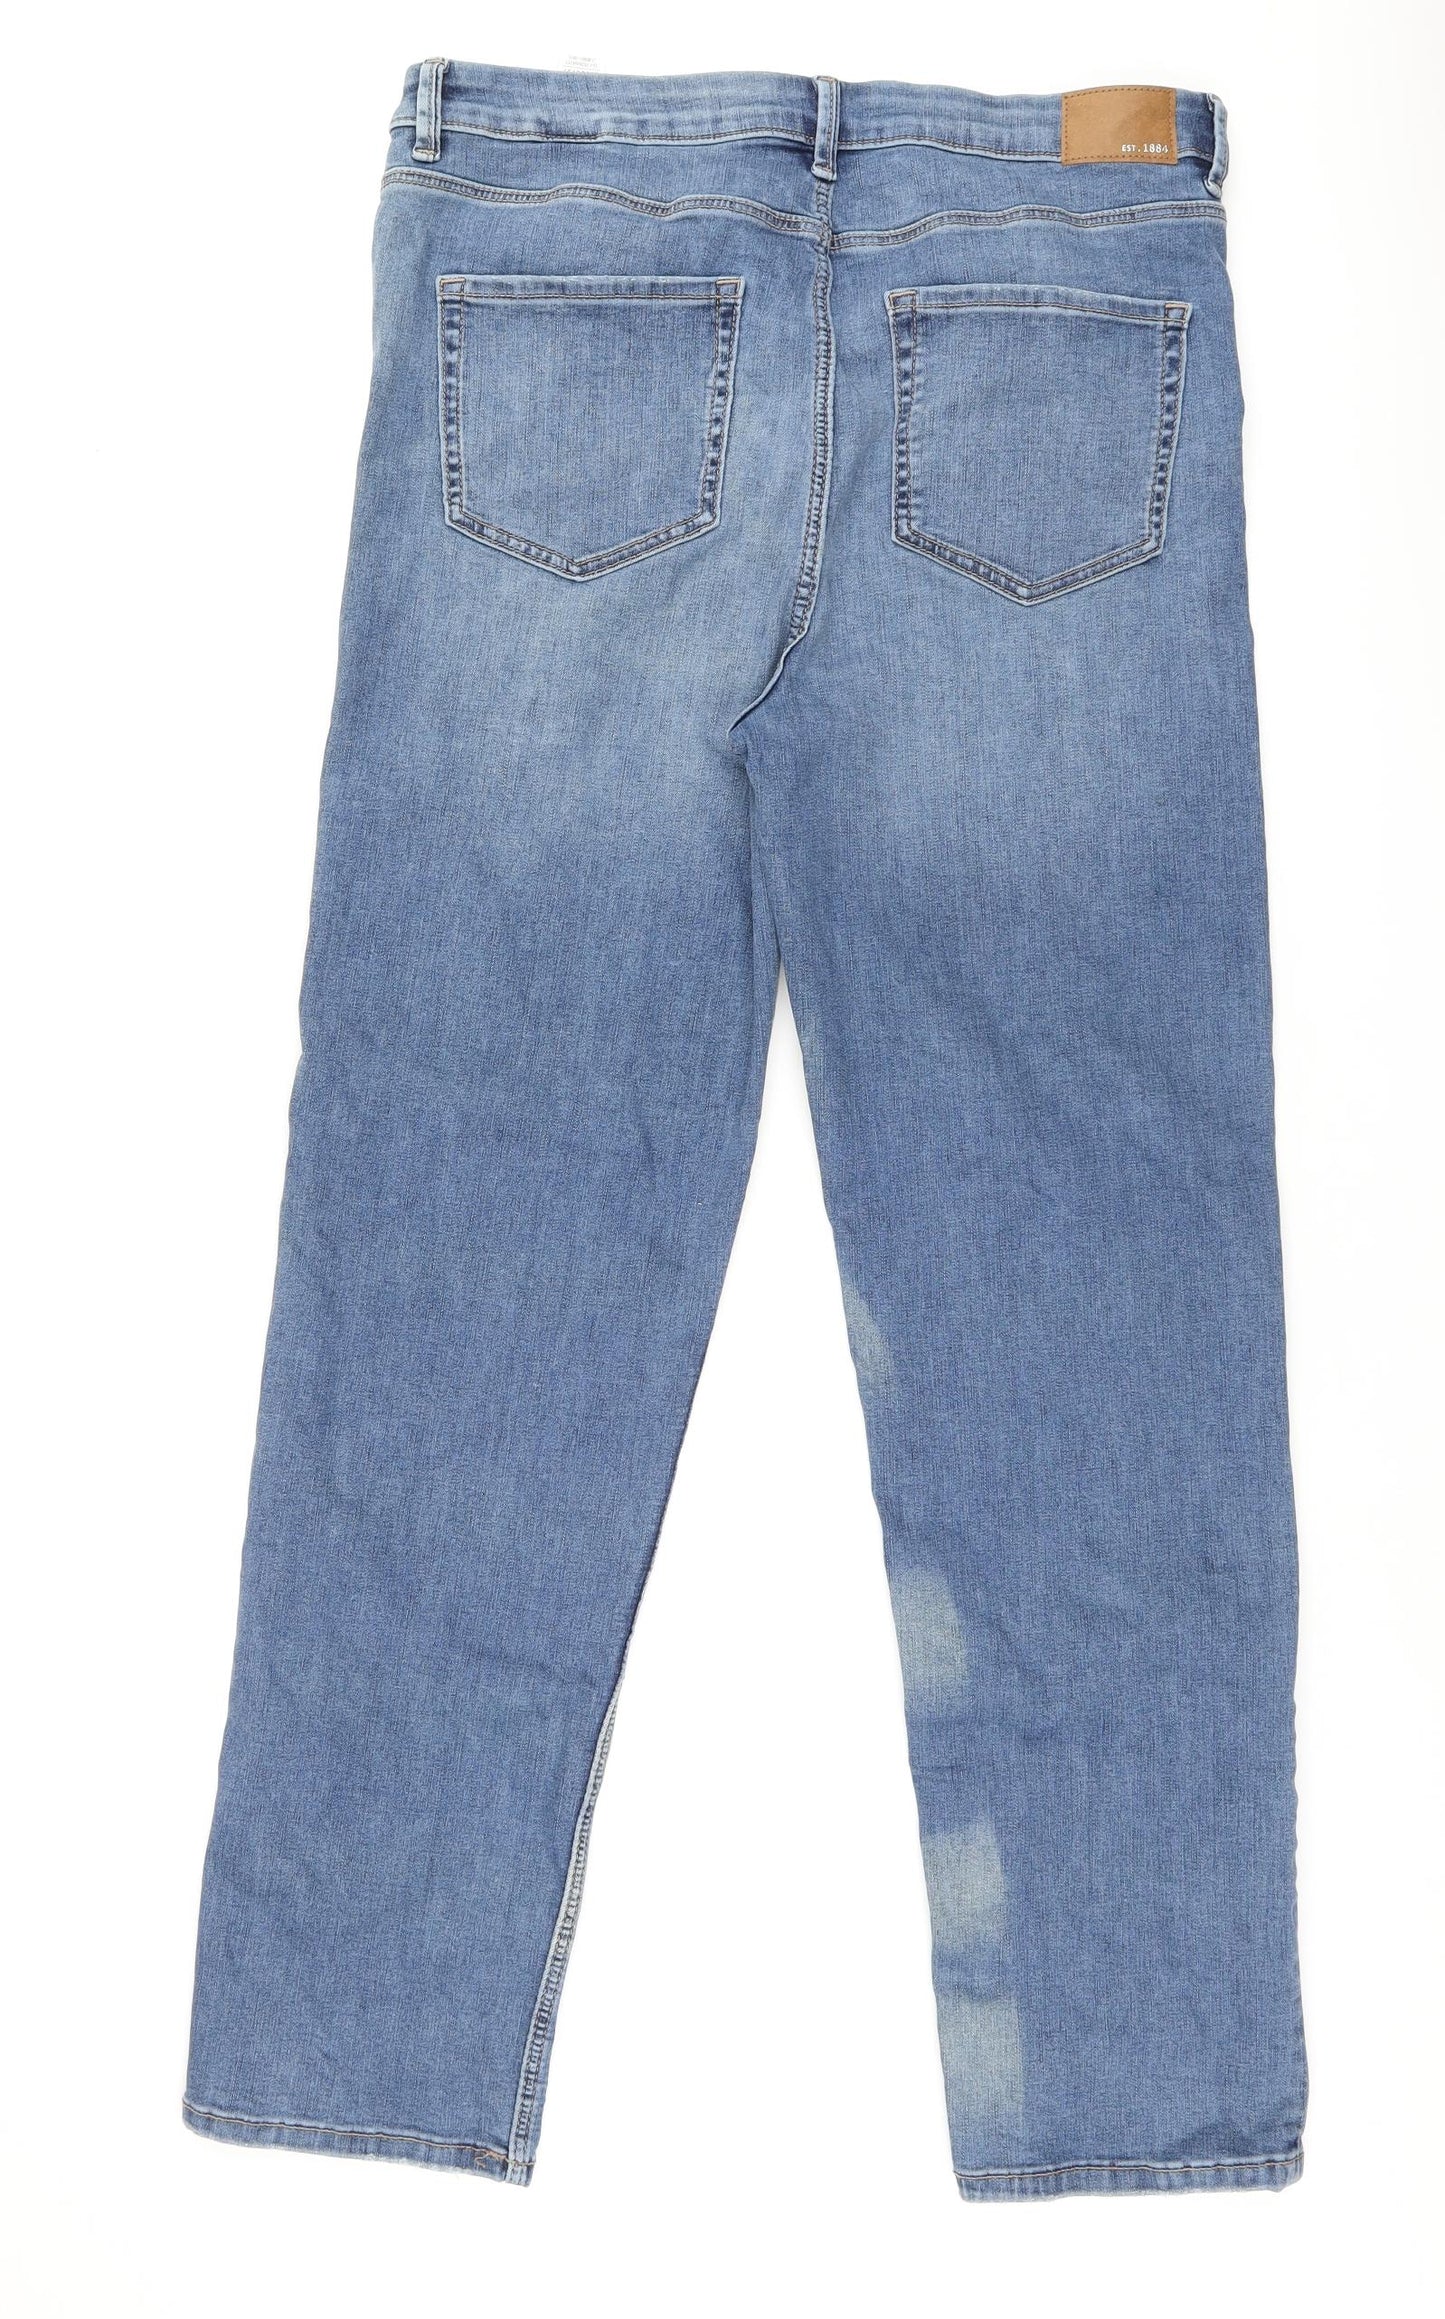 Marks and Spencer Womens Blue Cotton Straight Jeans Size 16 L29.5 in Regular Zip